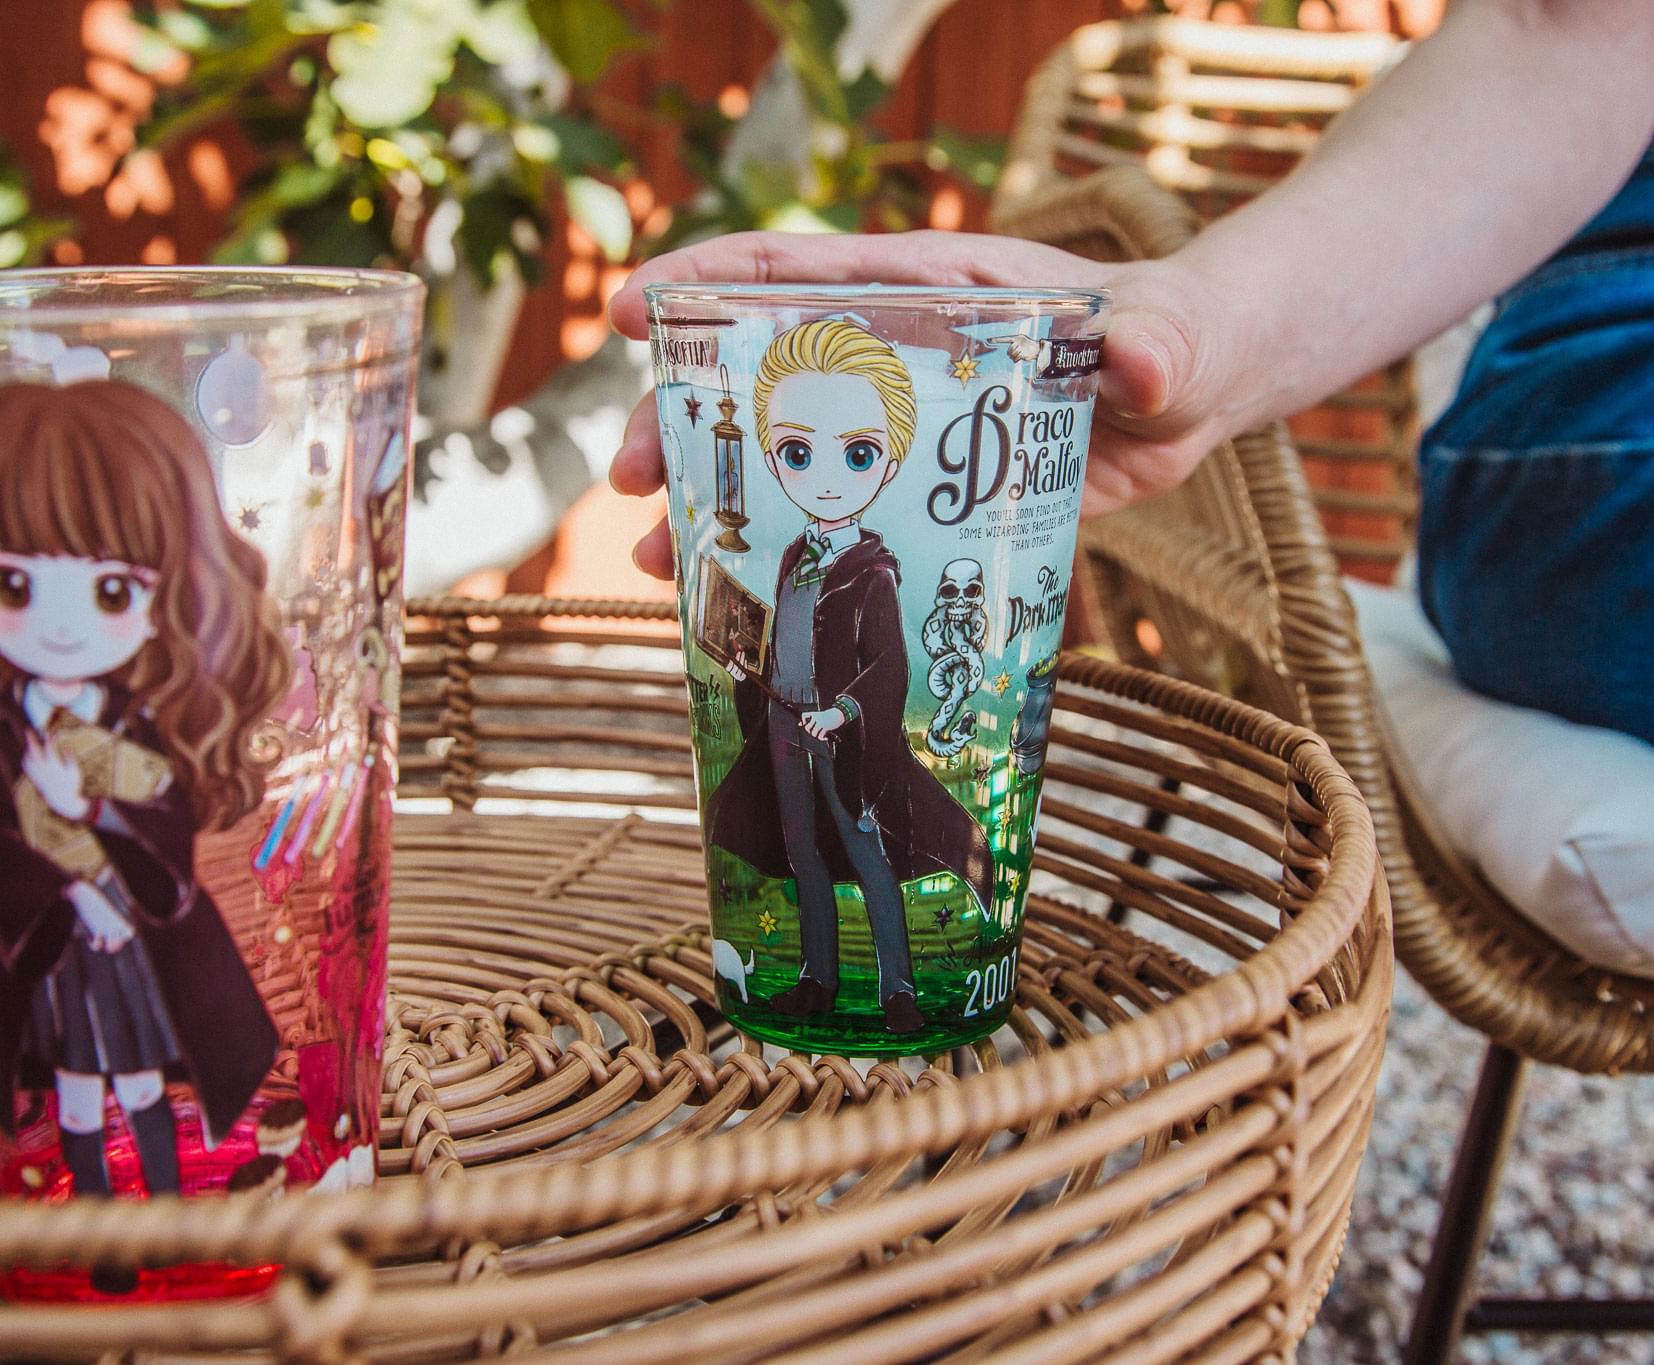 Harry Potter Magical Characters 16-Ounce Pint Glasses | Set of 4